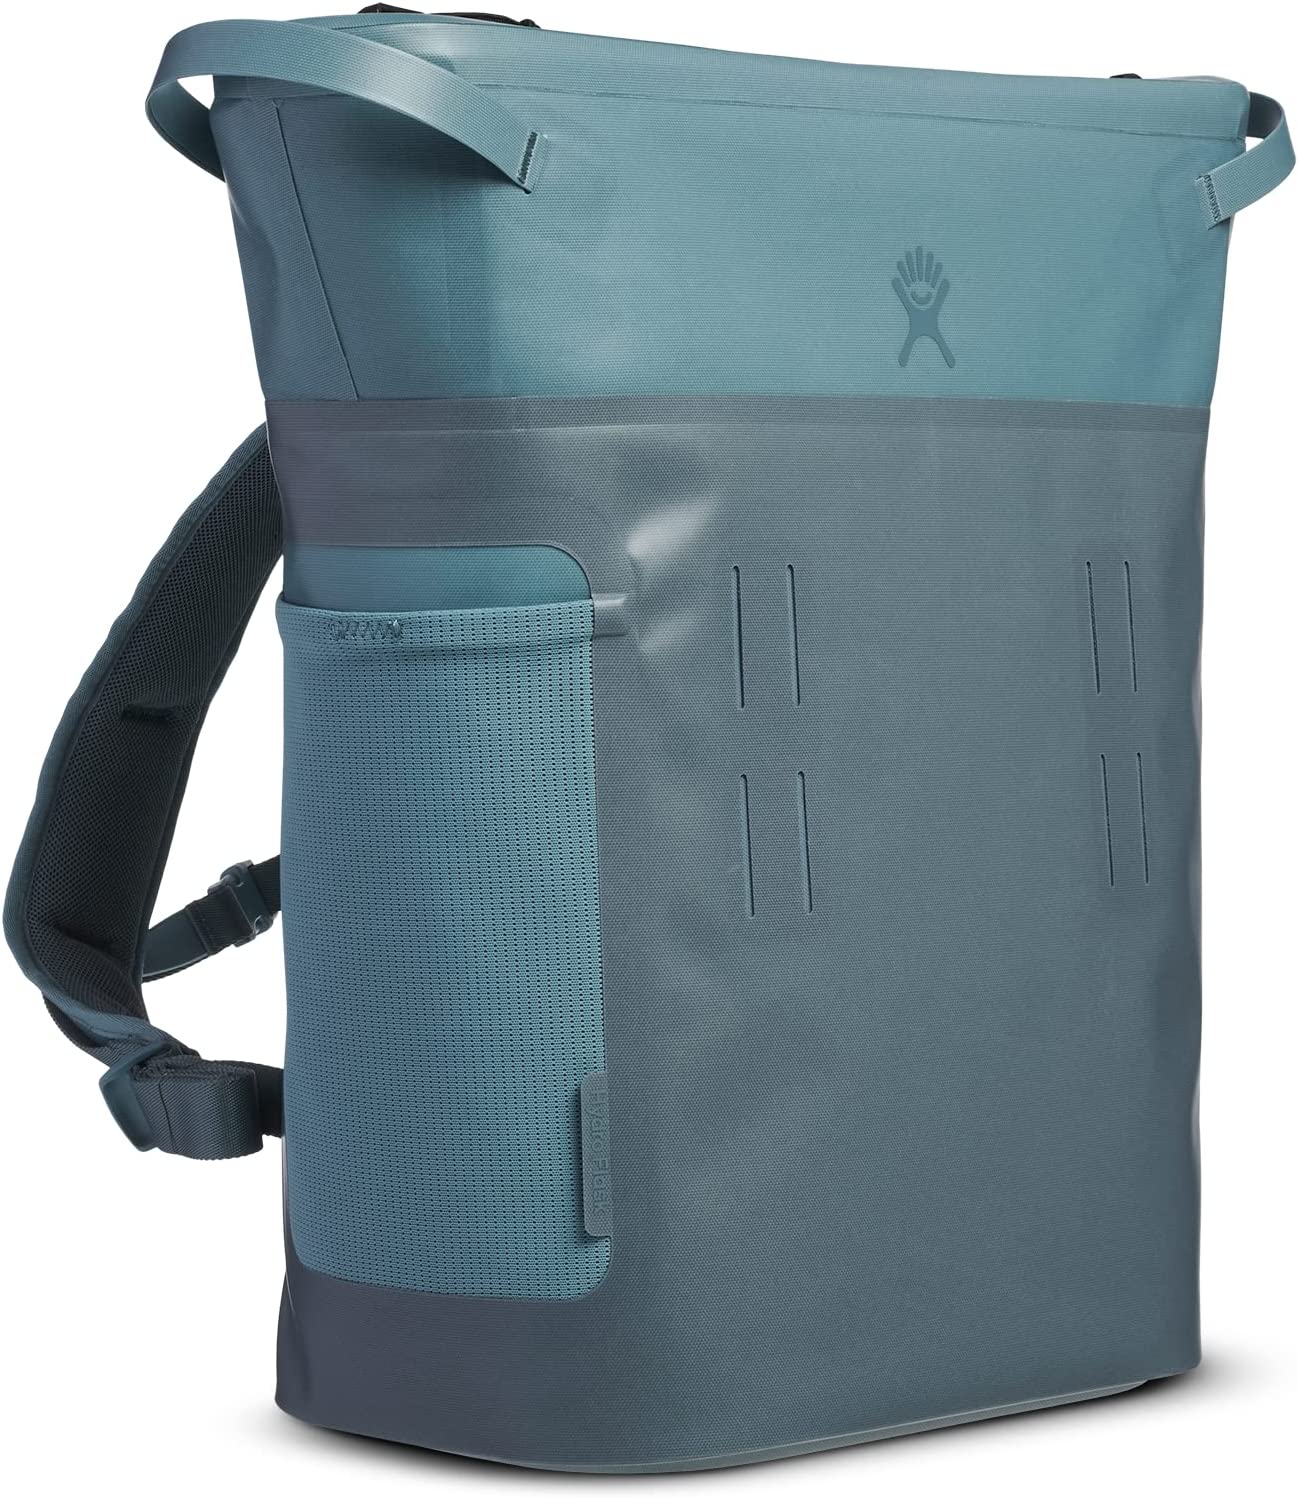 Hydro Flask 20 L Day Escape backpack cooler